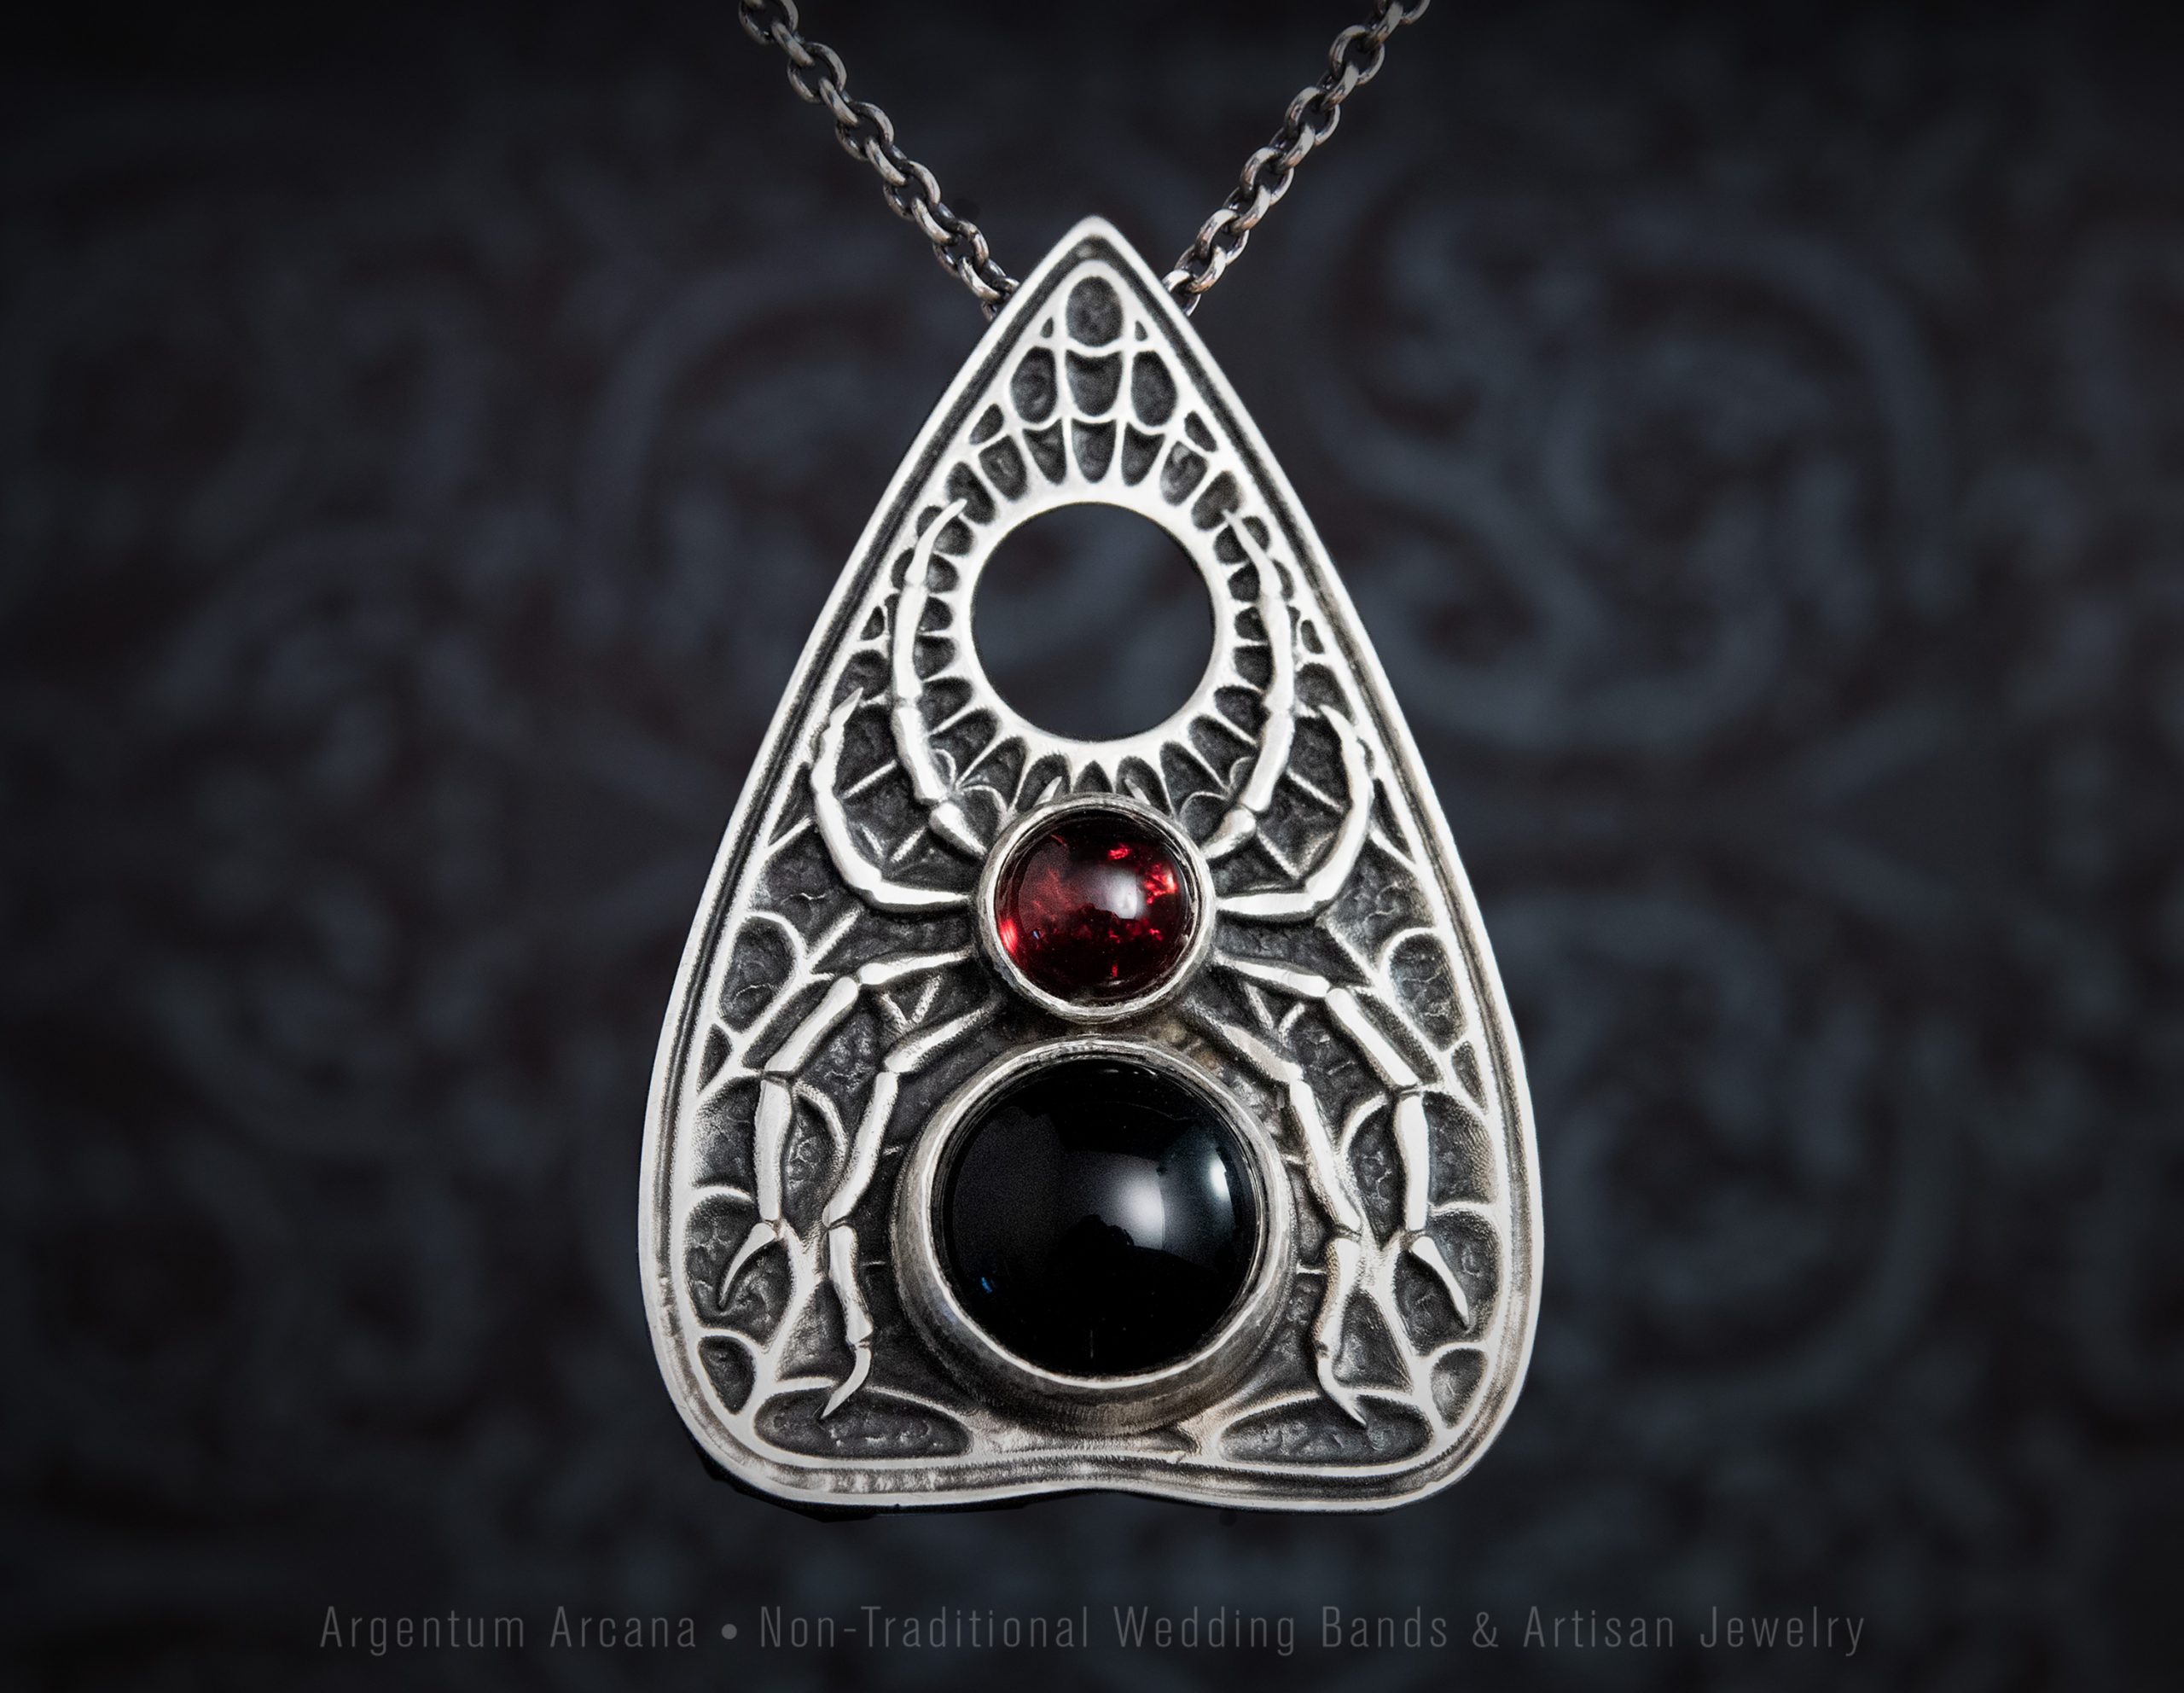 Silve Planchette with Spider Design with body made from black onyx and red garnet cabochons